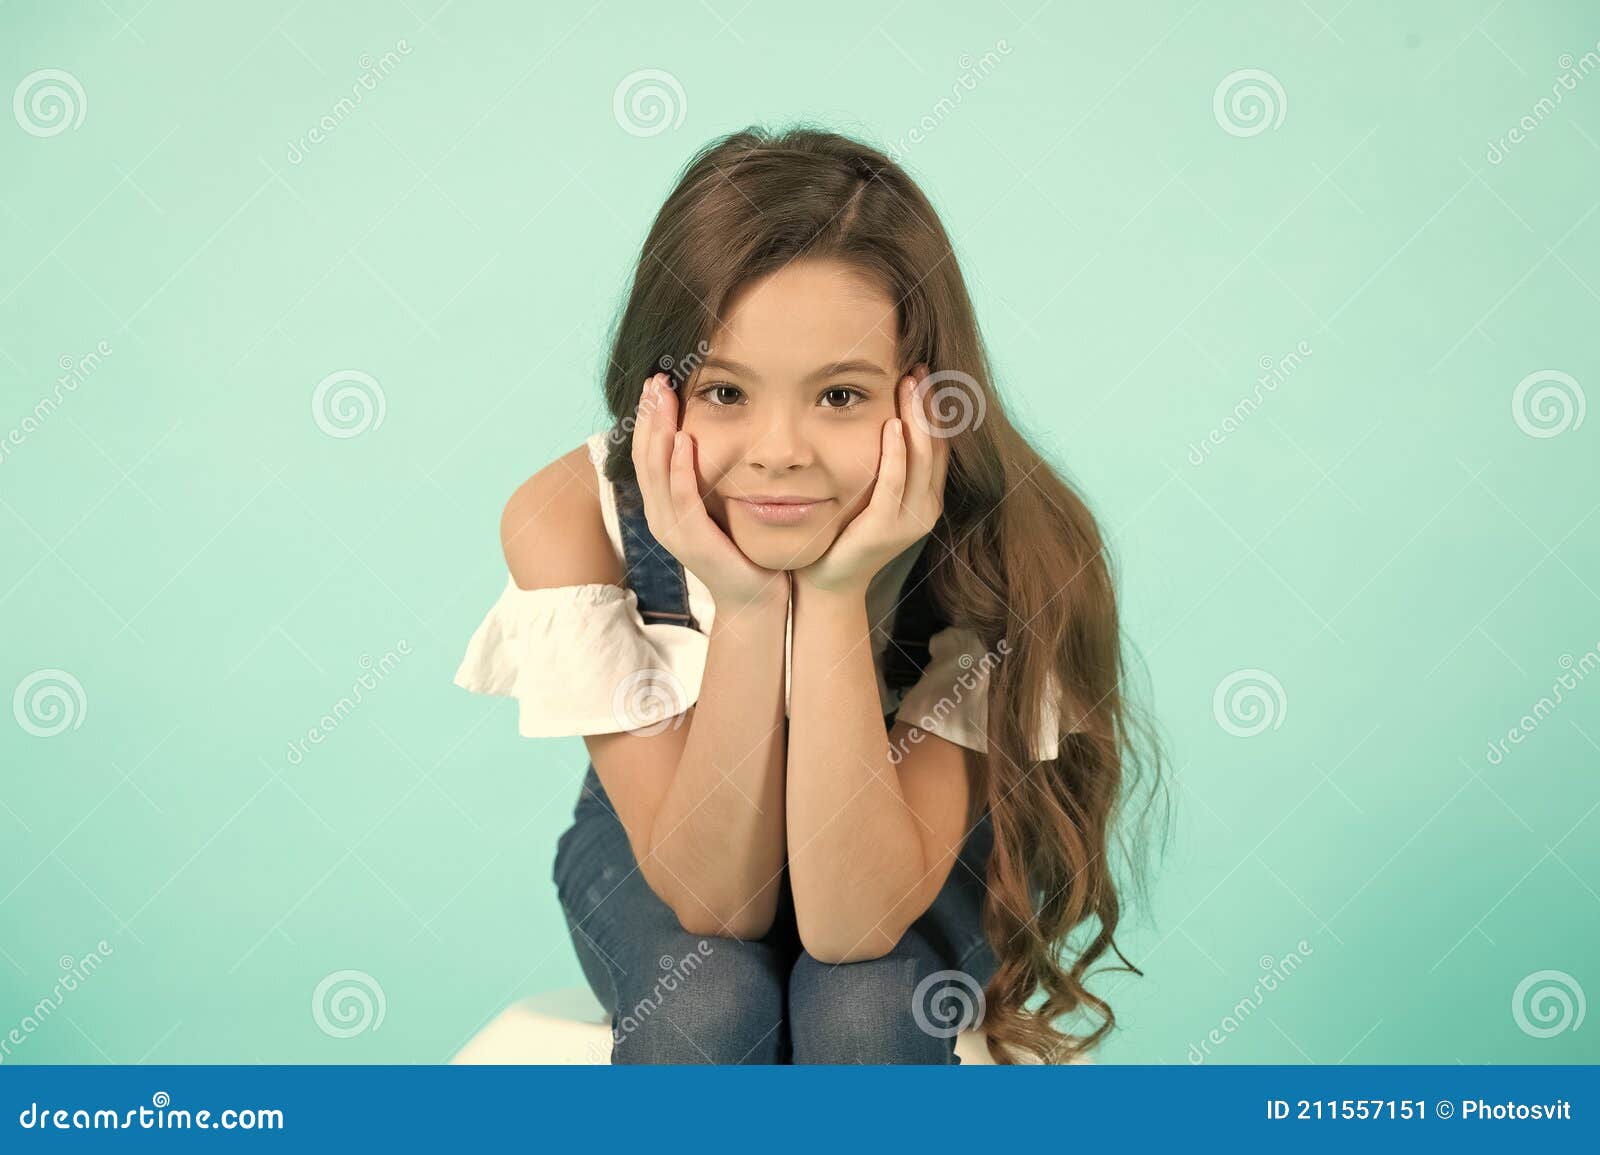 Preteen Model with Hands on Cute Face Stock Image - Image of long, hair:  211557151